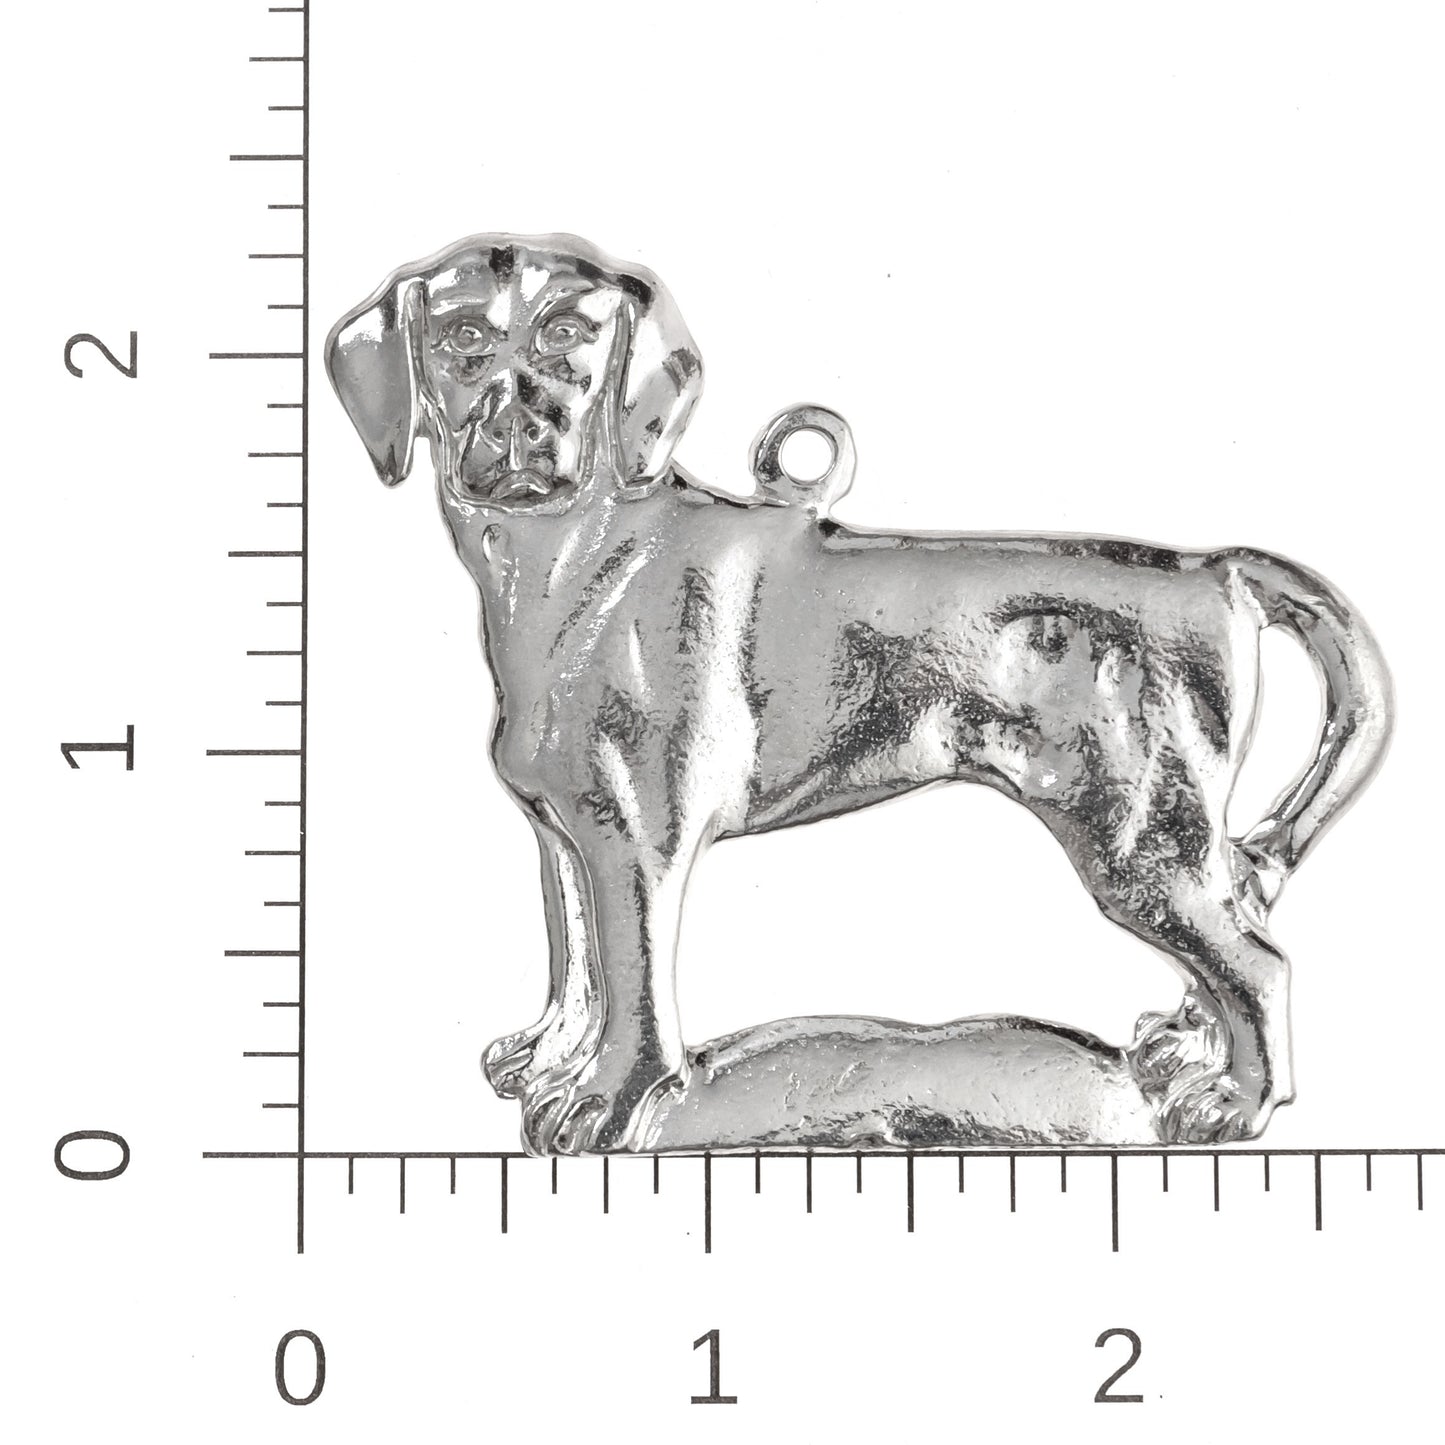 Silver Pewter Metal Beagle Ornament Top Gift Ideas - House of Morgan Pewter